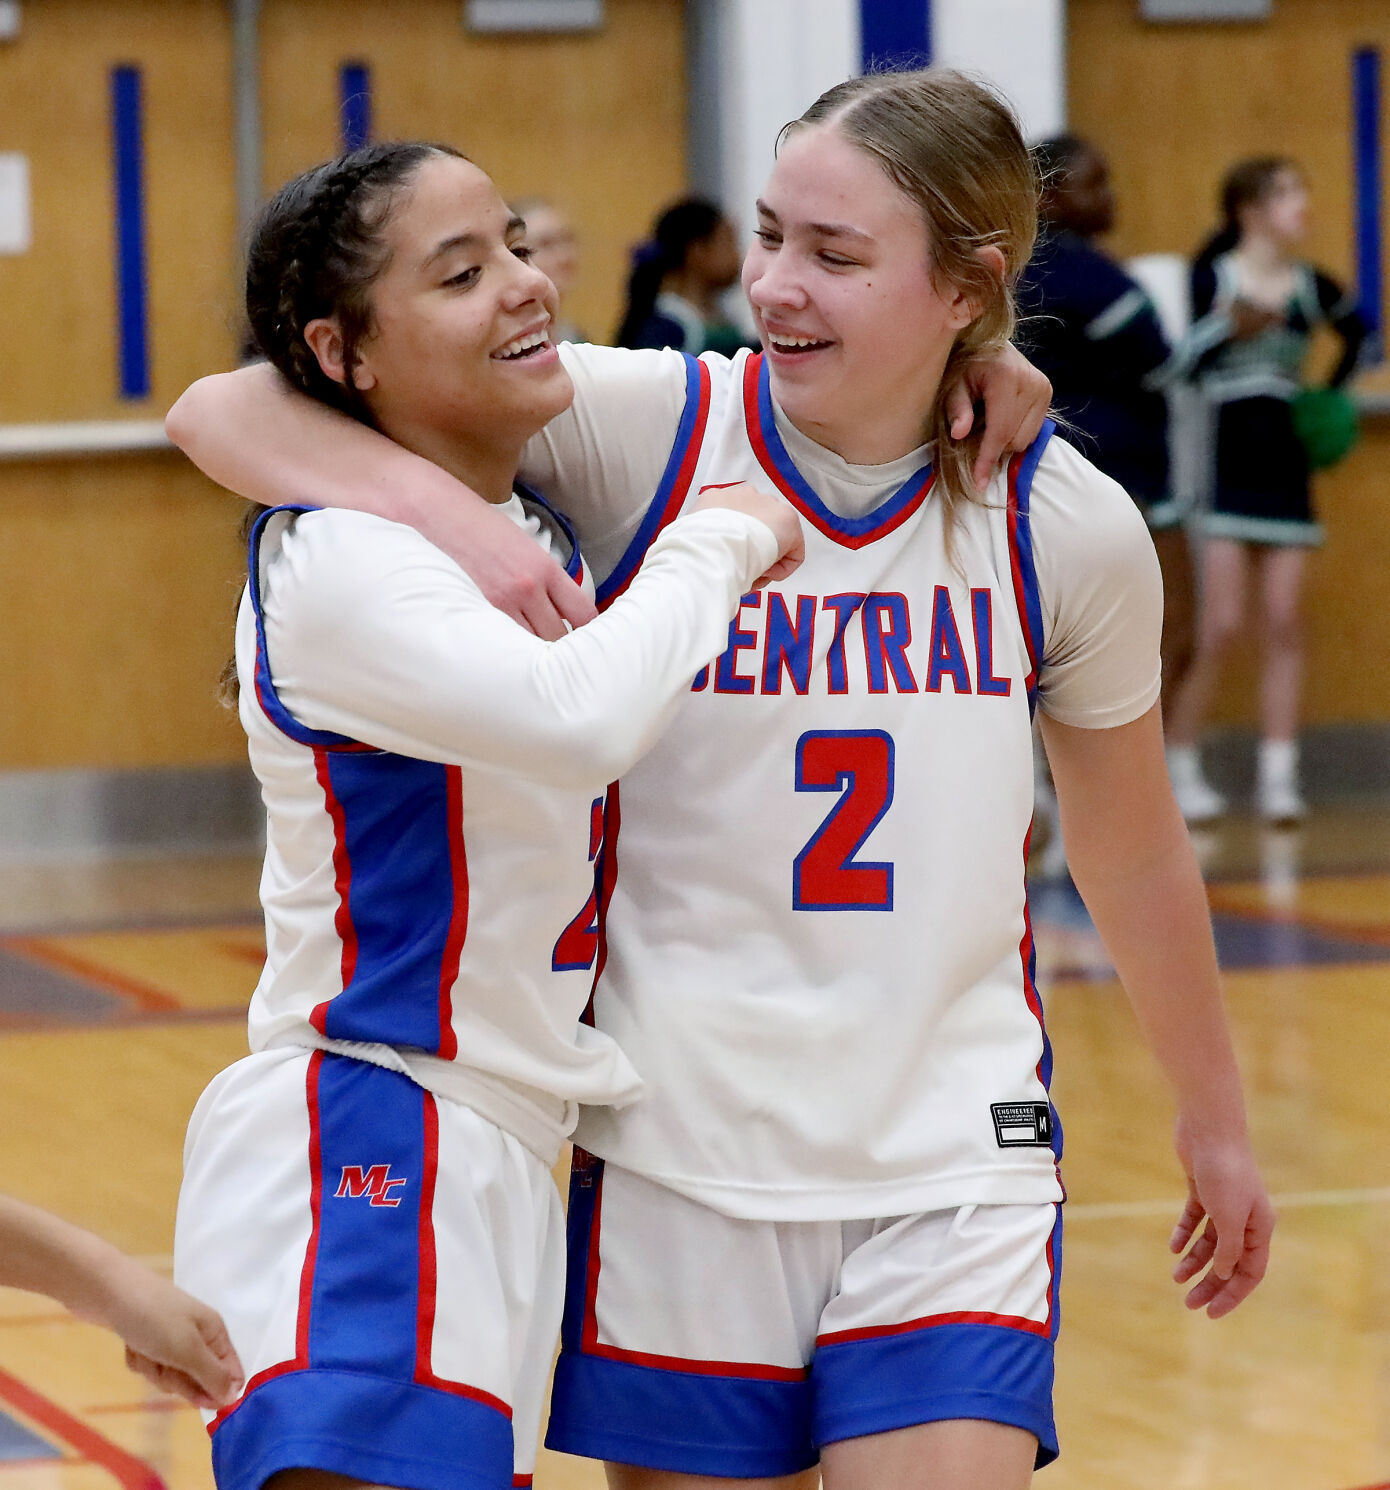 Madison Central Triumphs in Thrilling Win to Semifinals